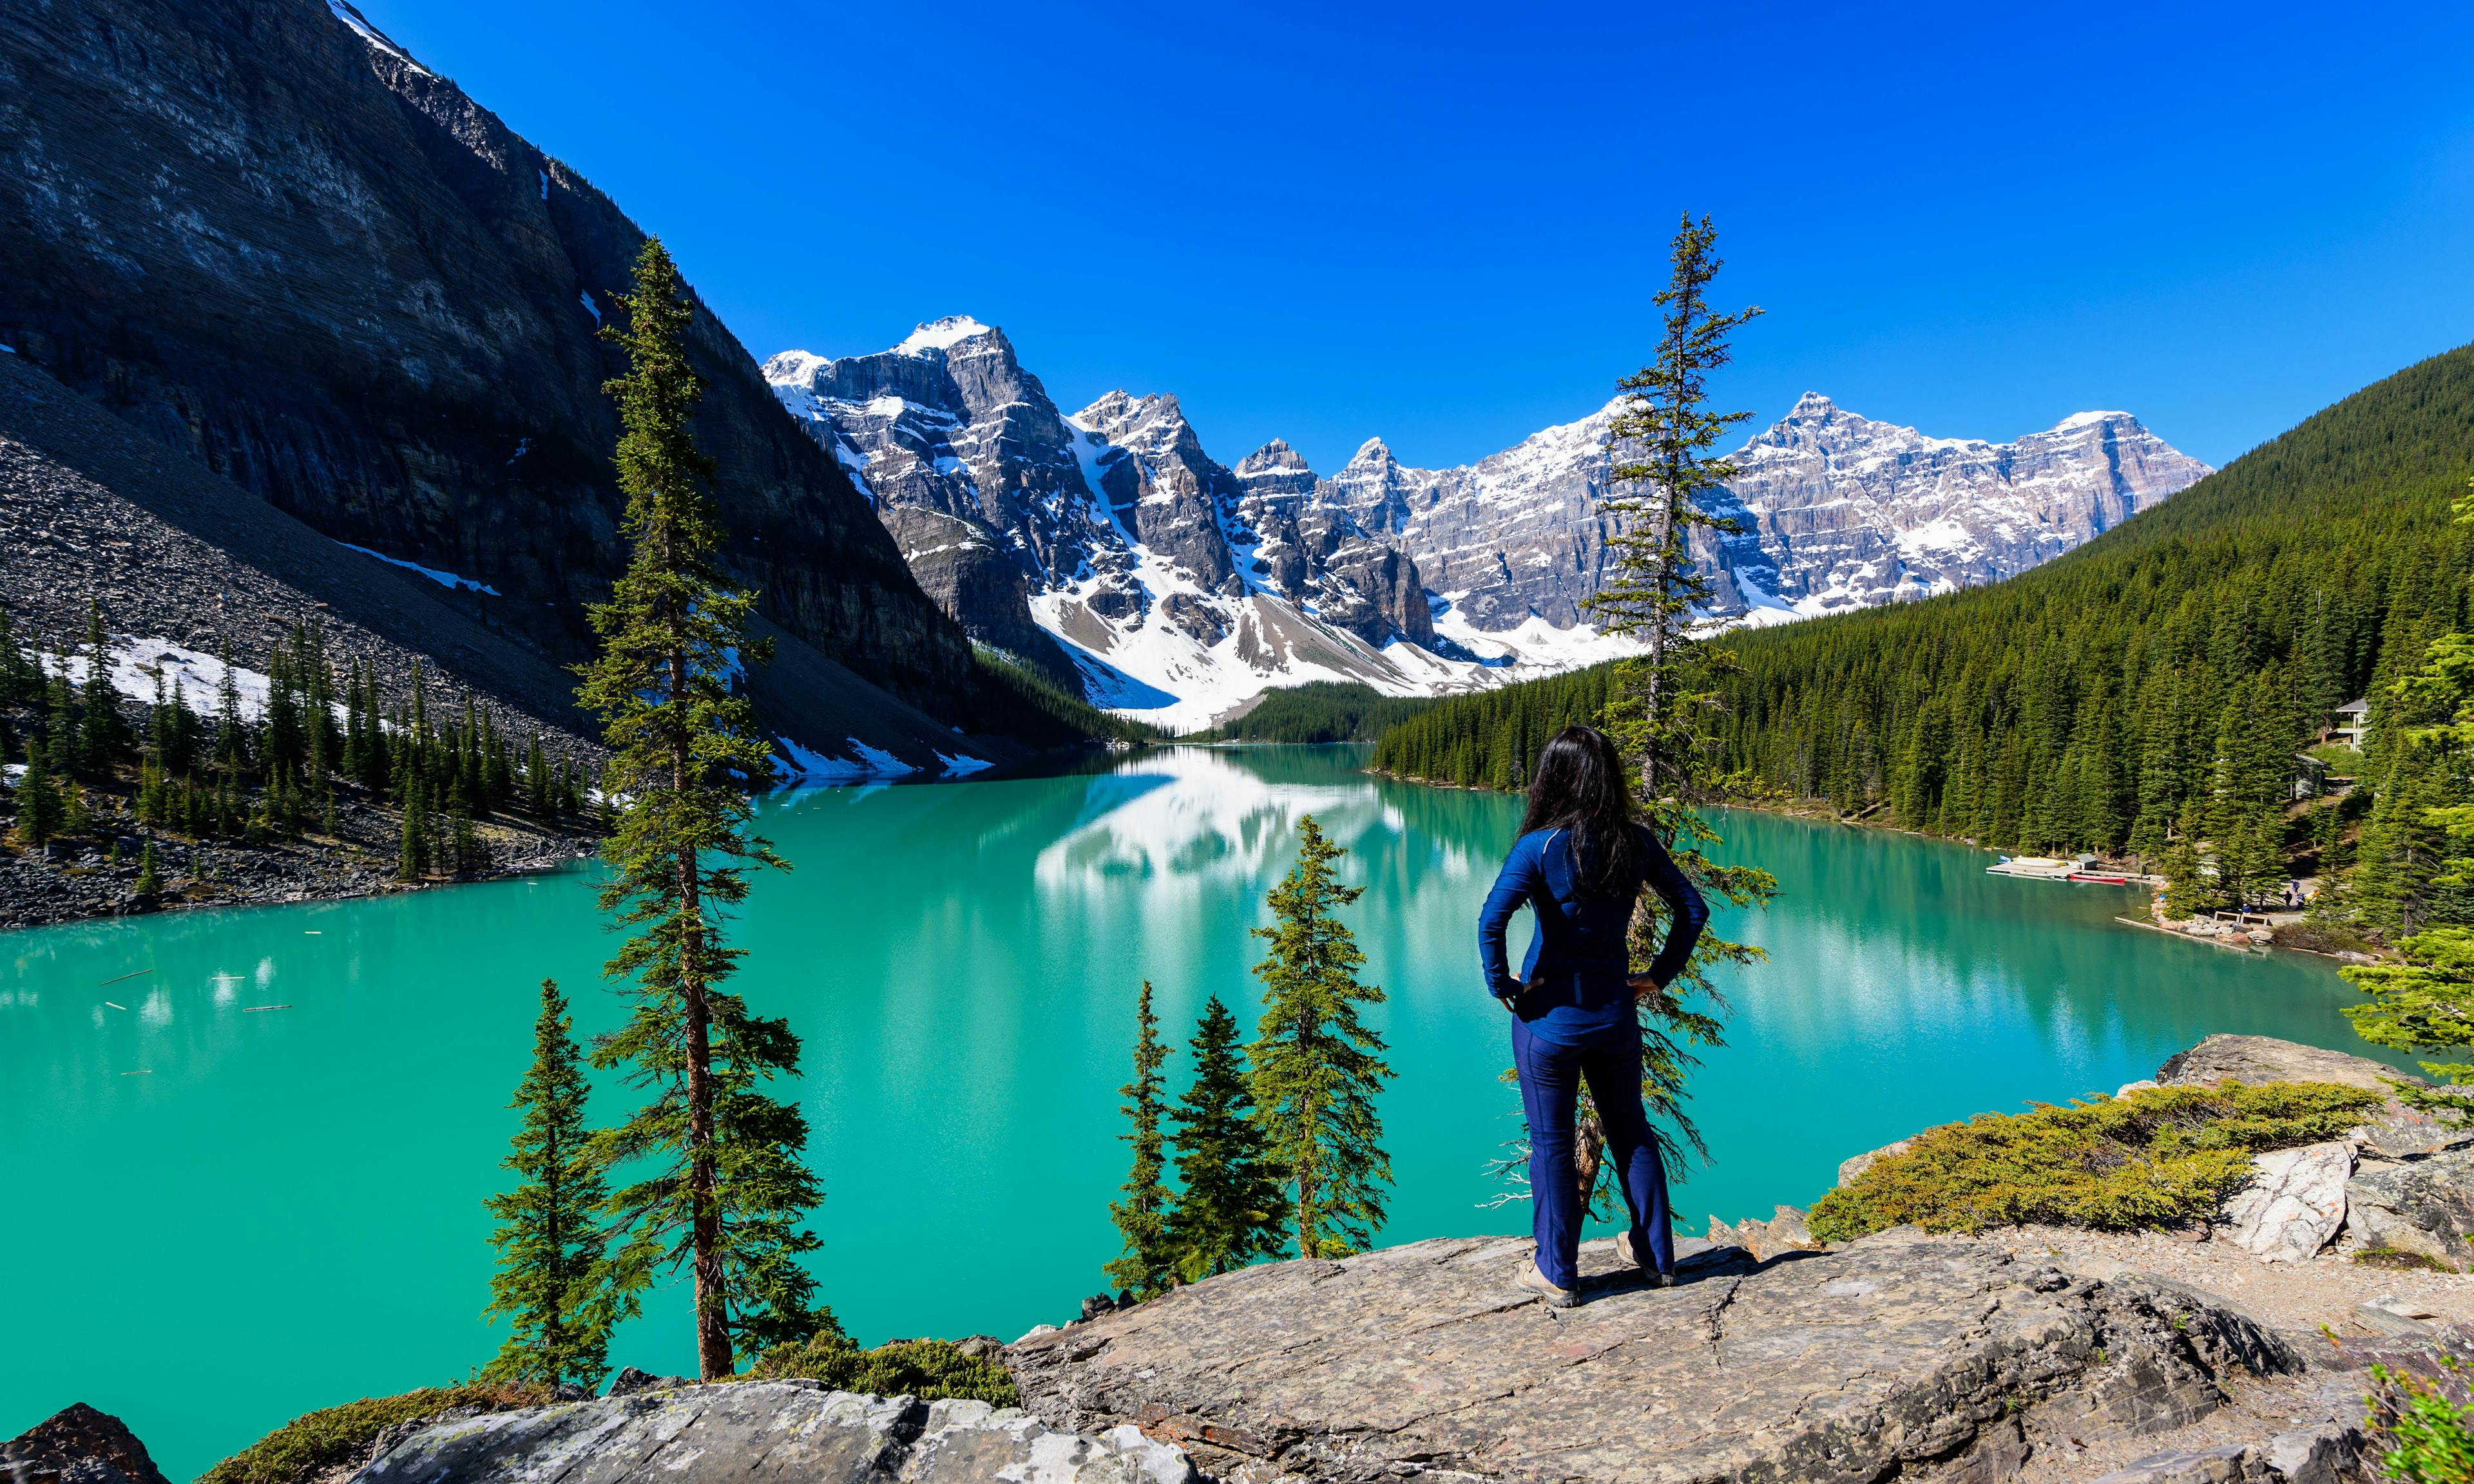 Woman on cliff admiring Moraine Lake and mountains scenic view, Rocky Mountains, Banff National Park, Alberta, Canada